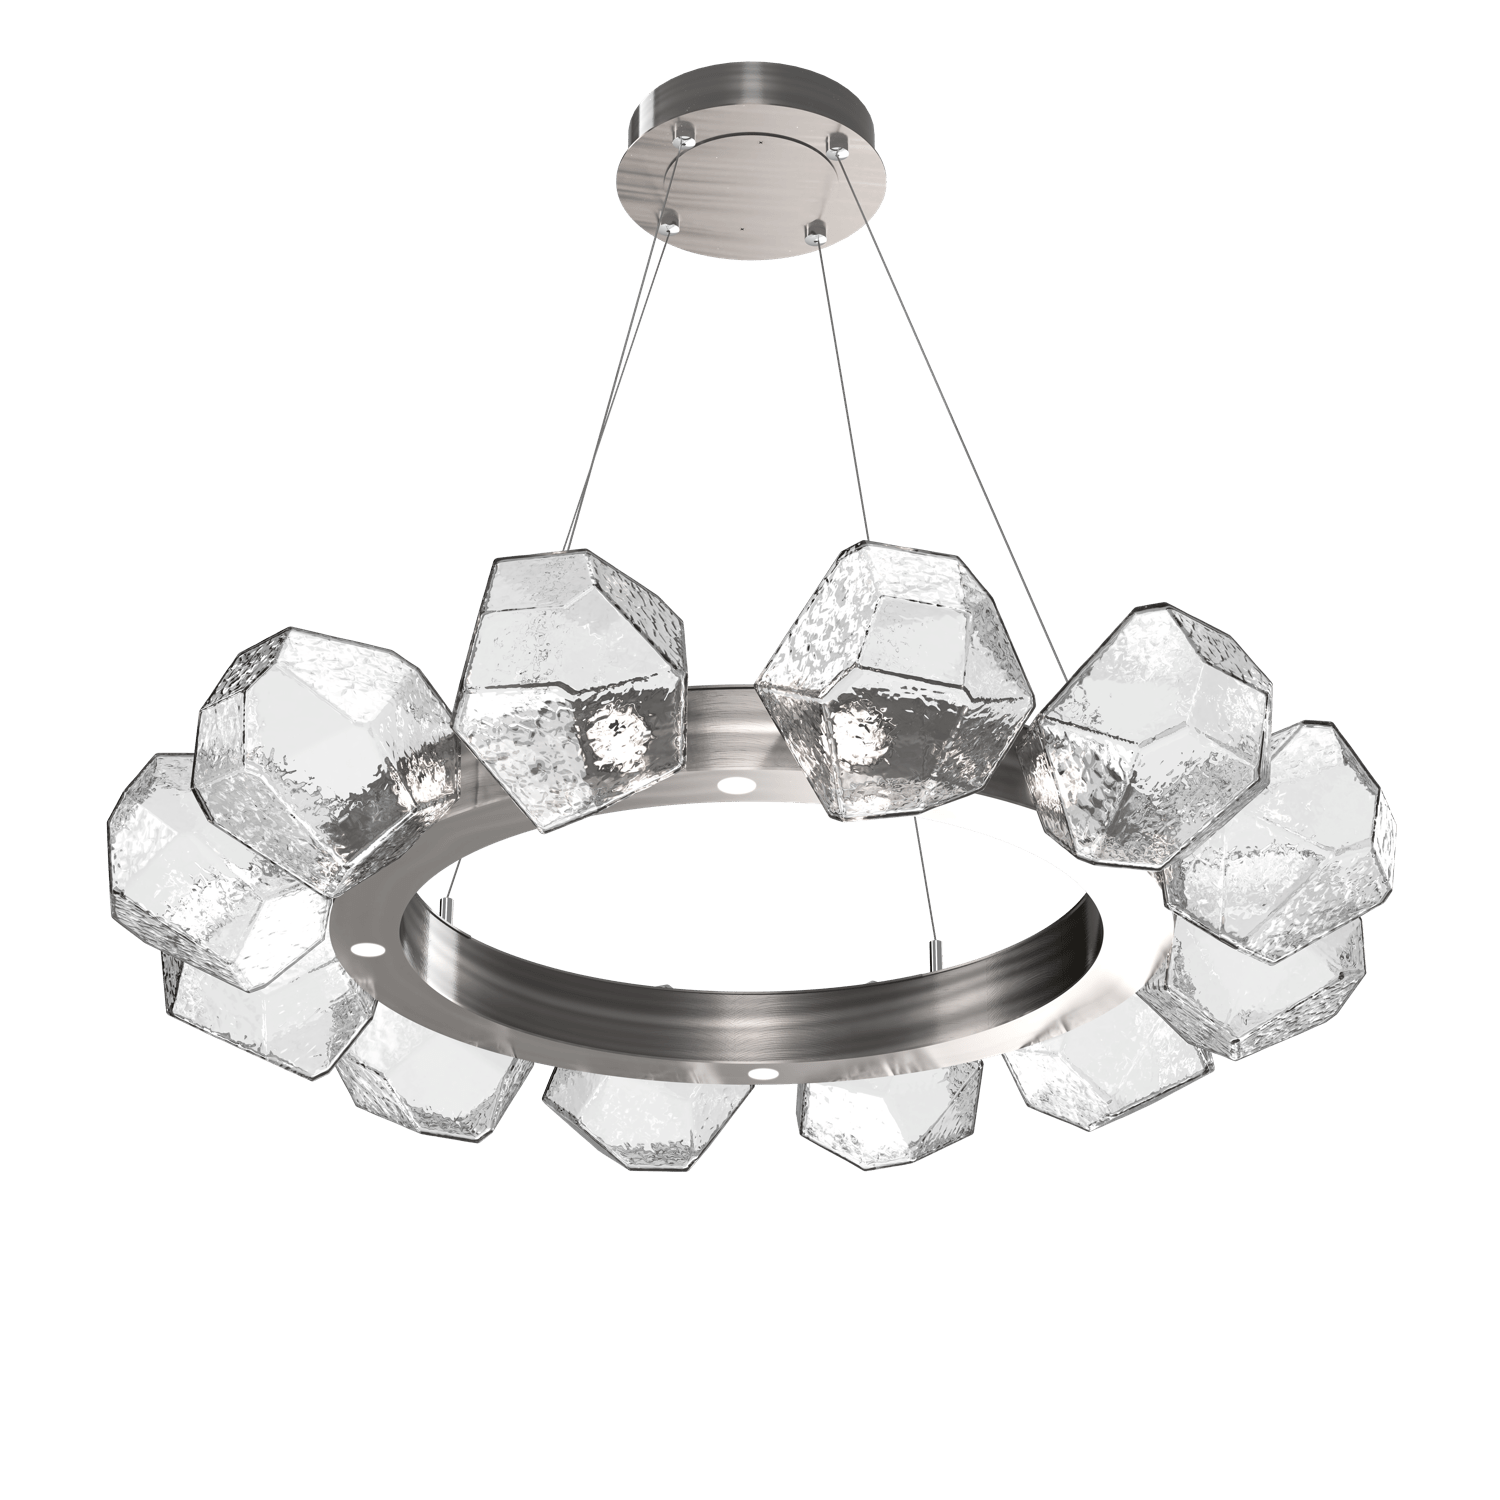 CHB0039-36-GM-C-Hammerton-Studio-Gem-36-inch-radial-ring-chandelier-with-gunmetal-finish-and-clear-blown-glass-shades-and-LED-lamping